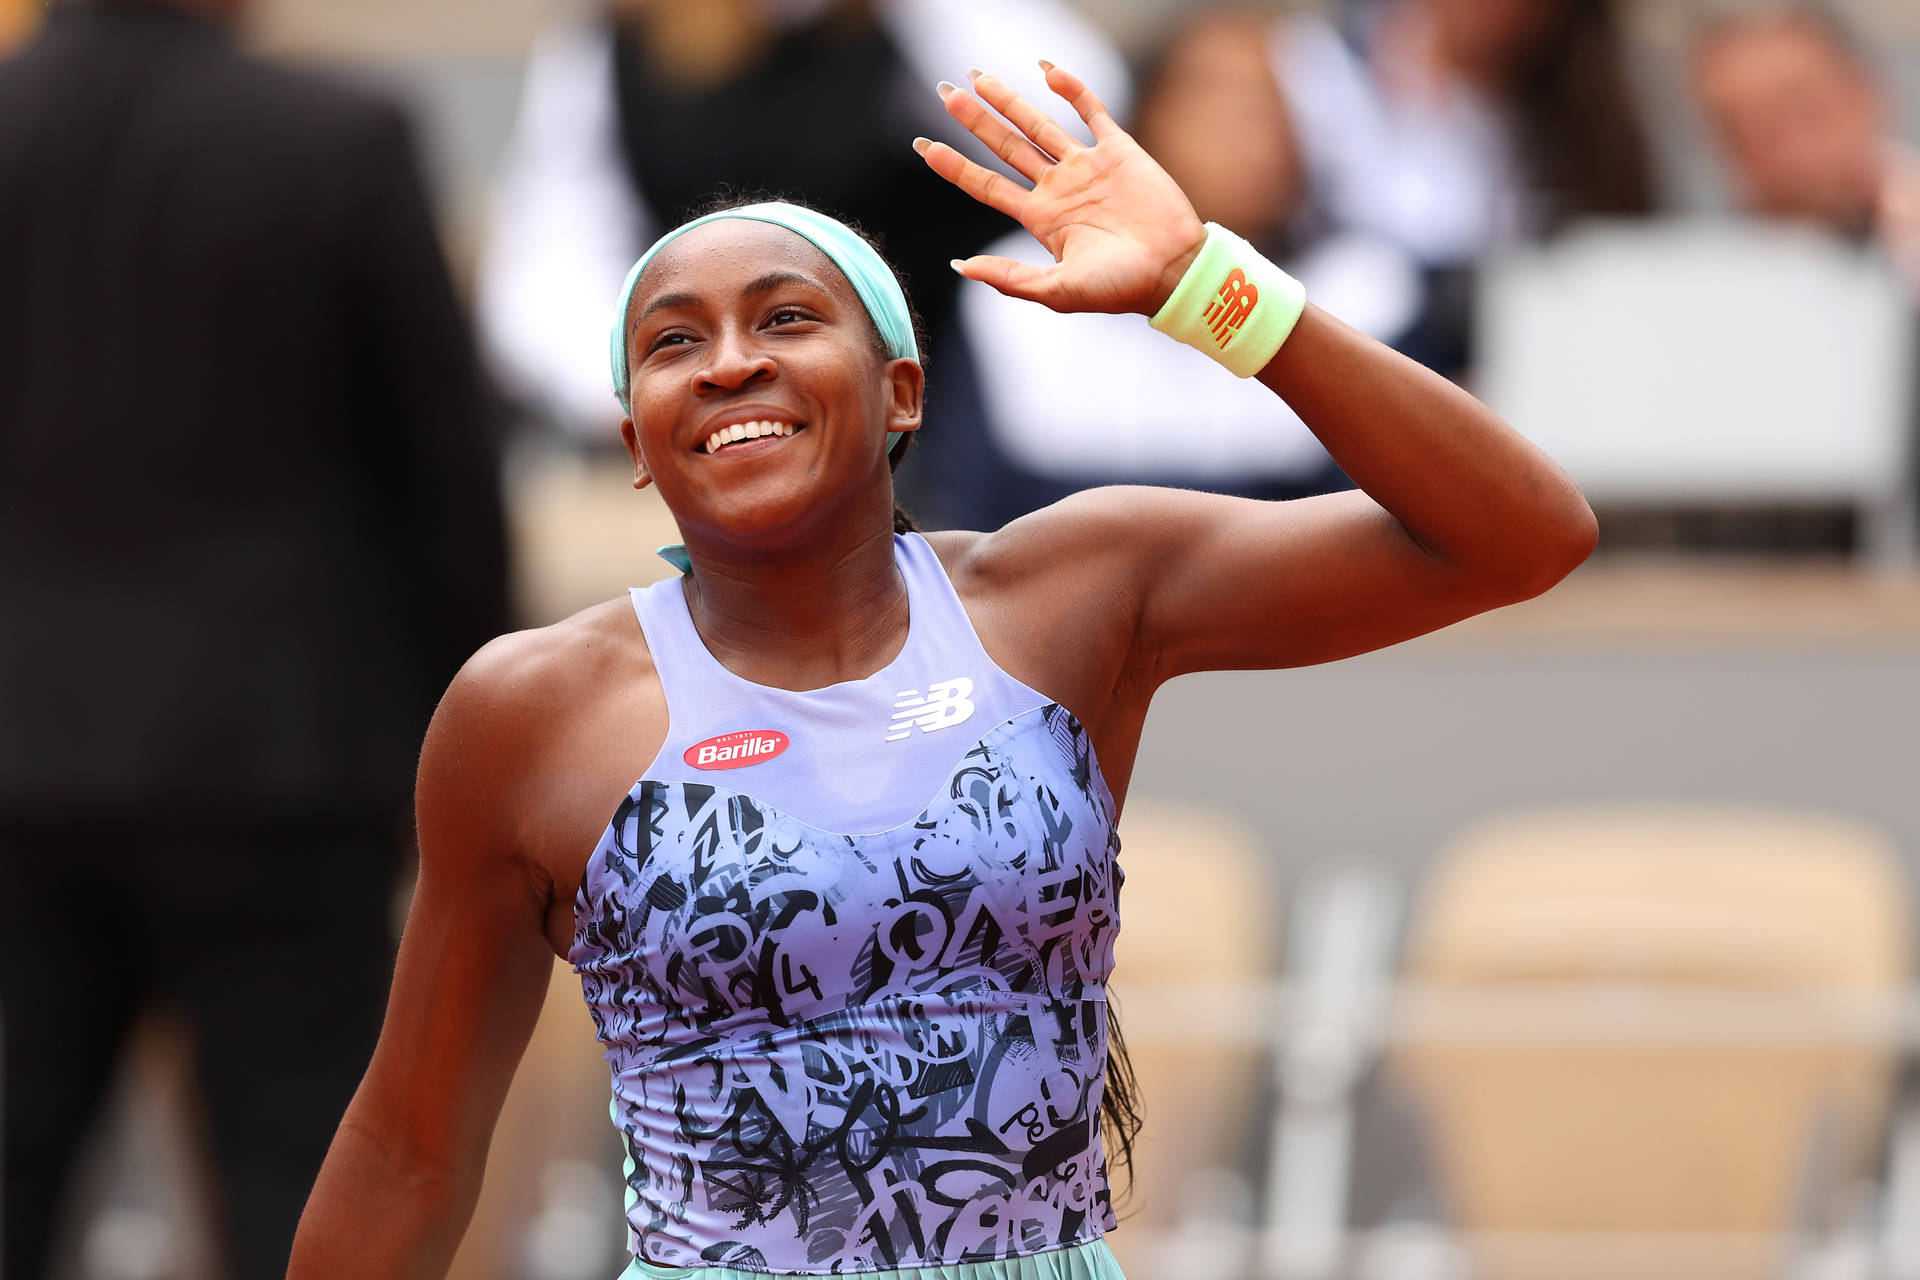 Cocogauff Lila Tryckt Outfit. Wallpaper